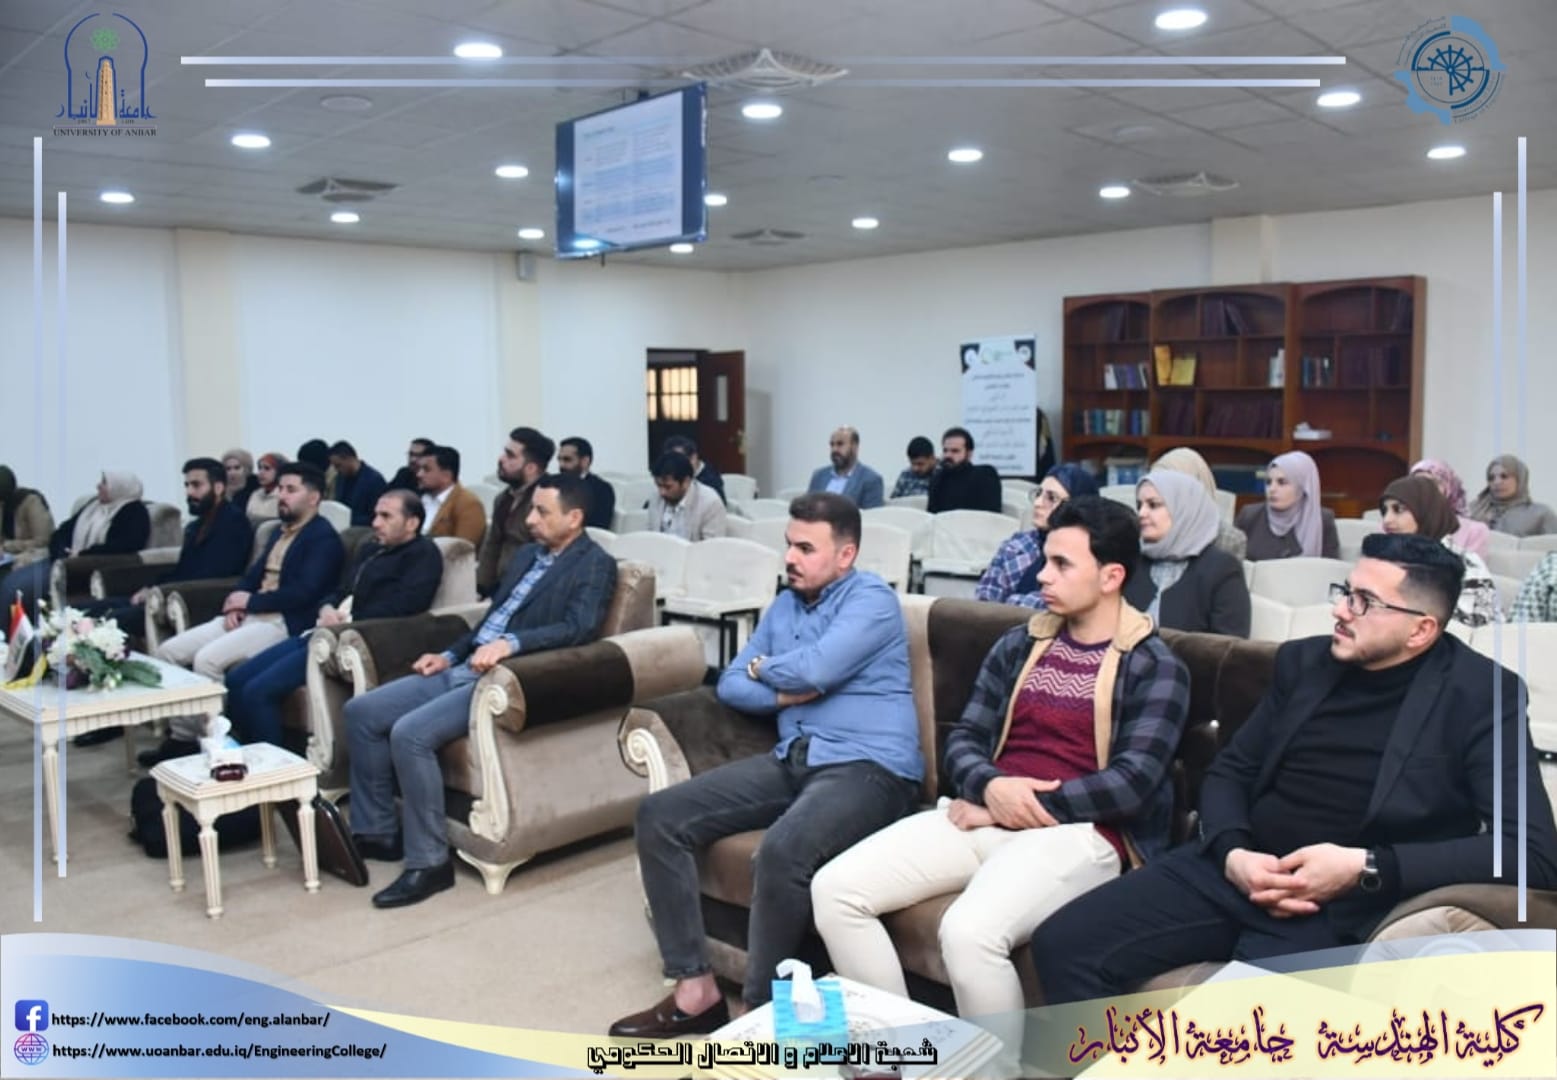 The Deanship of the College of Engineering holds a training workshop 